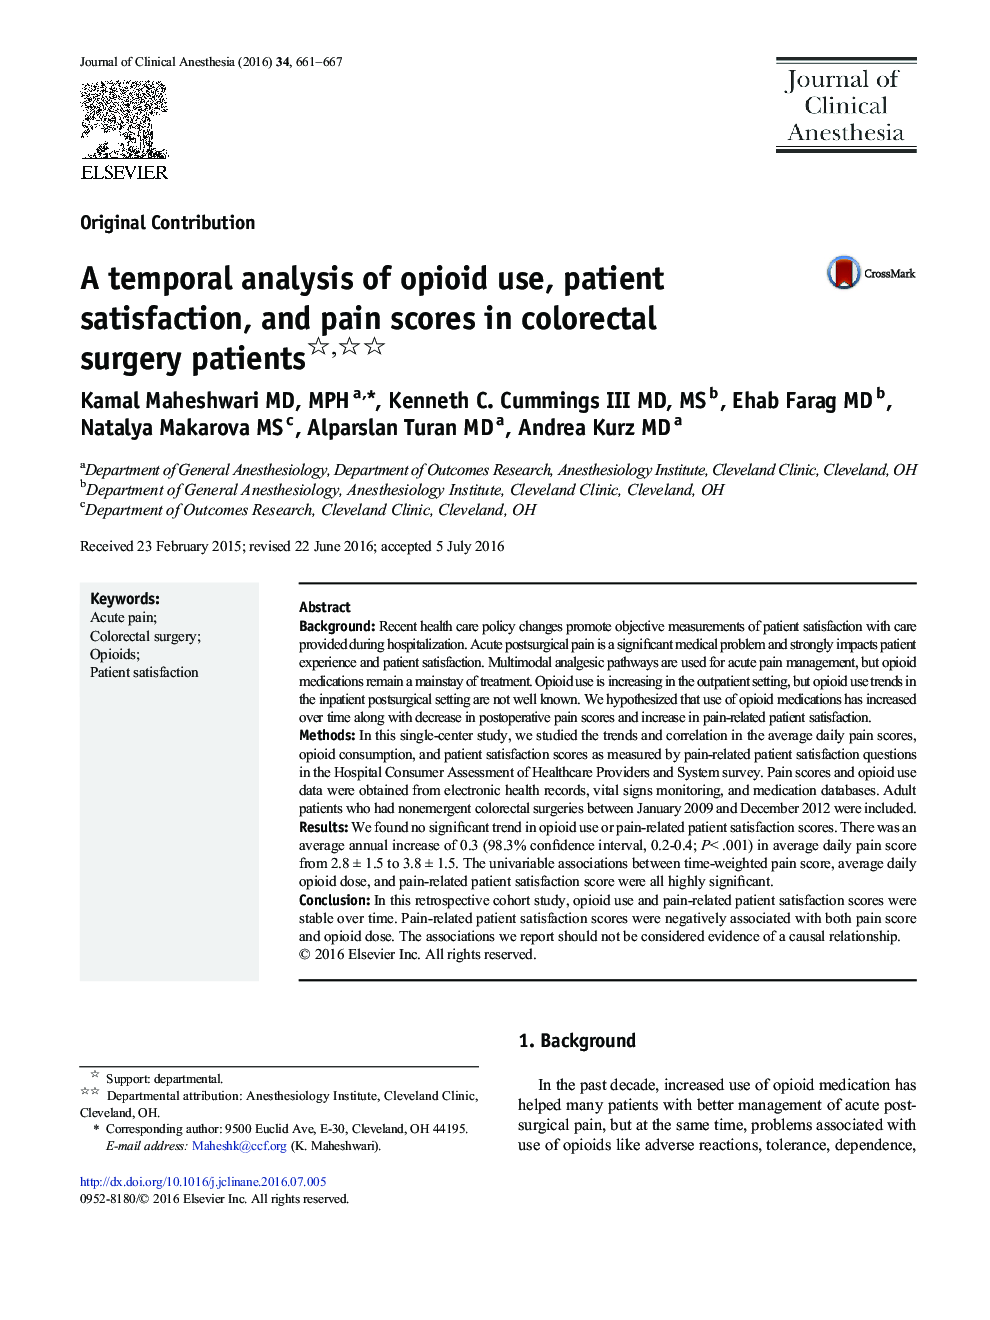 A temporal analysis of opioid use, patient satisfaction, and pain scores in colorectal surgery patients